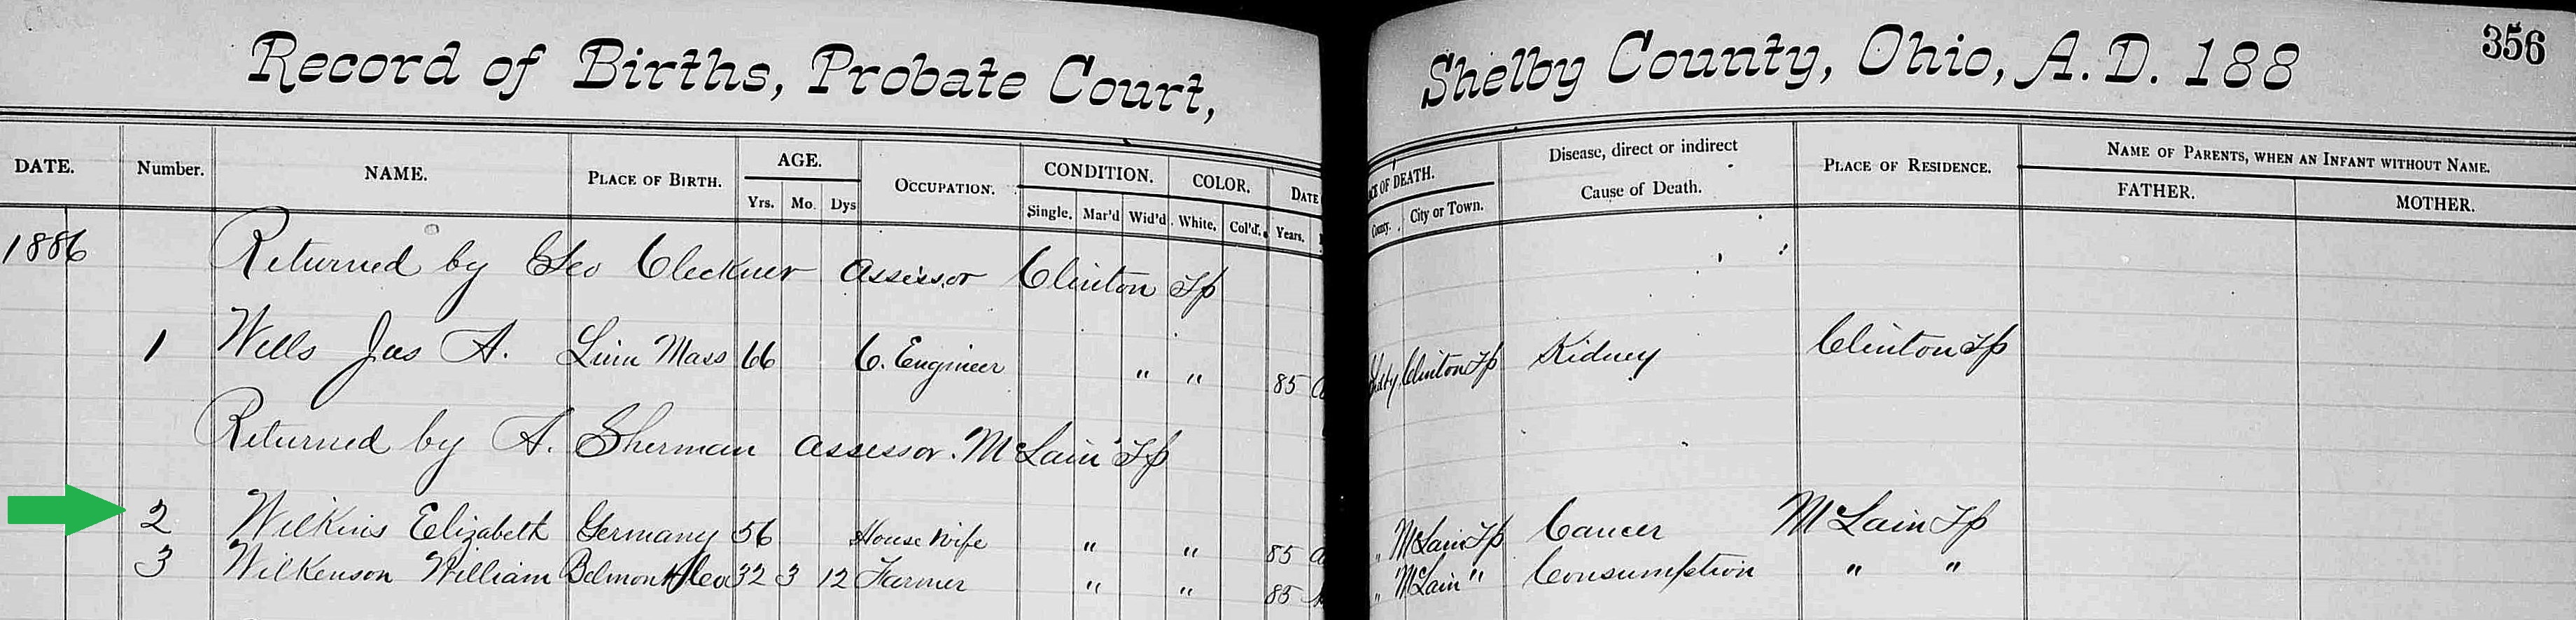 minster ohio county shelby county records